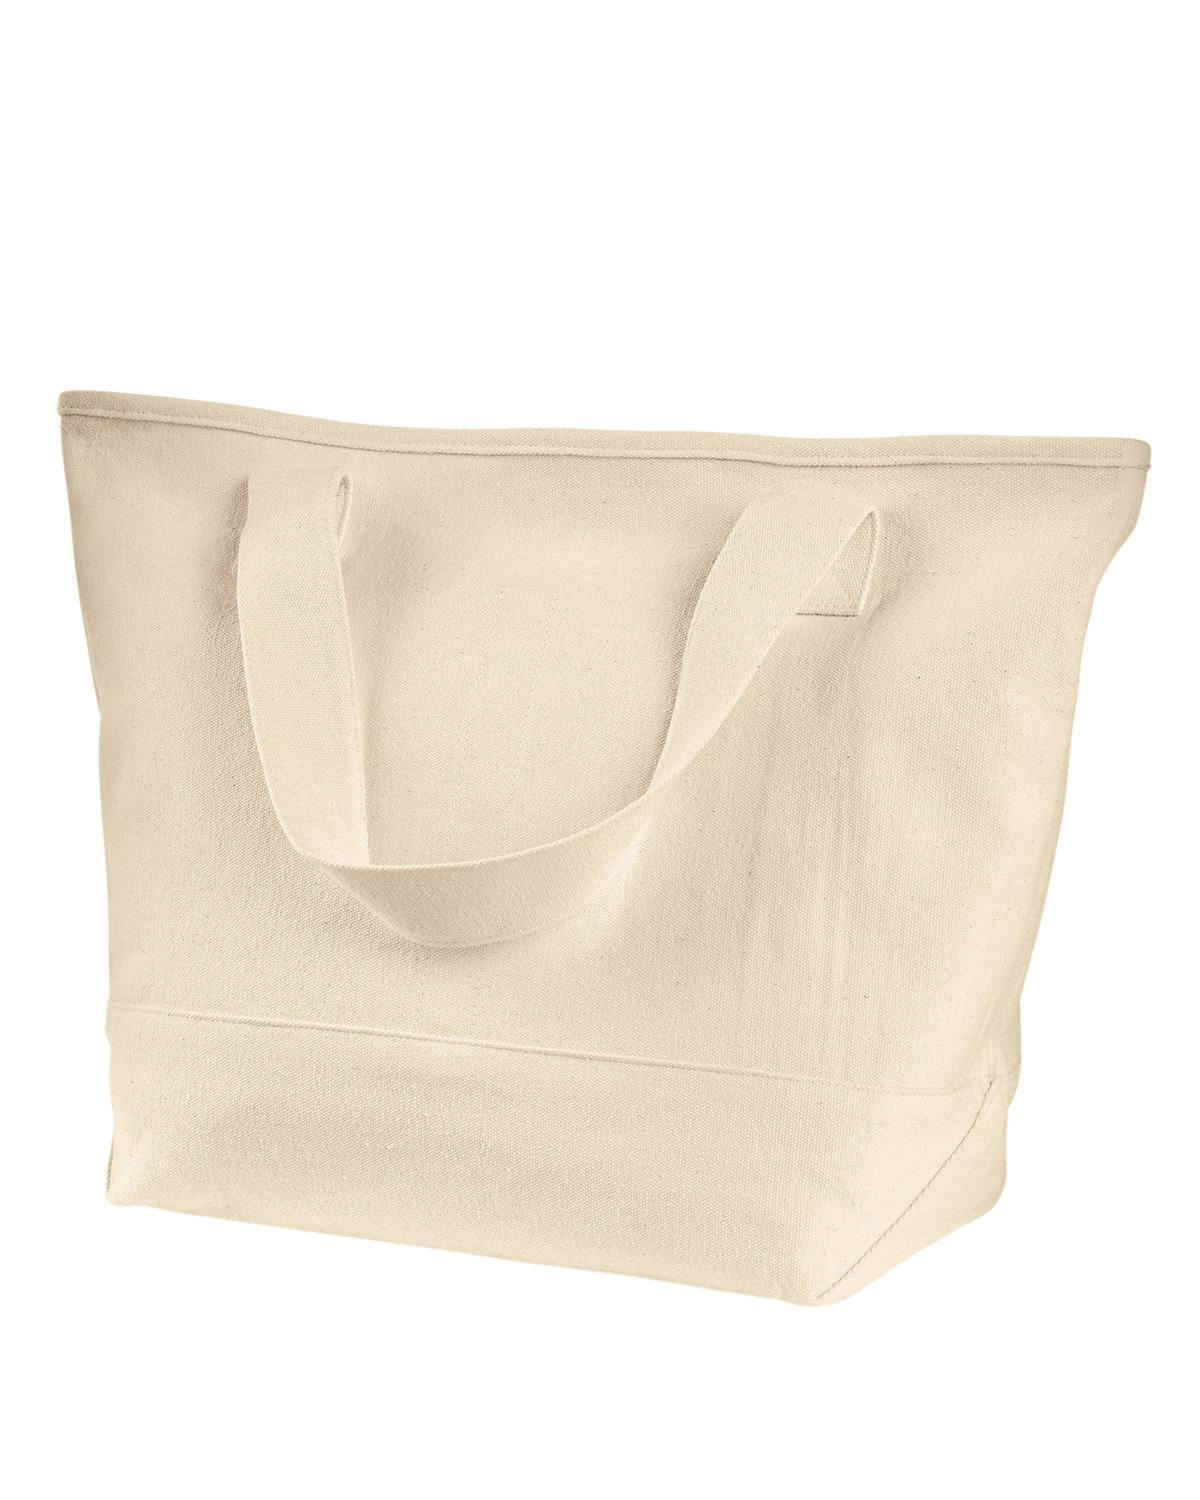 Image for Bottle Tote